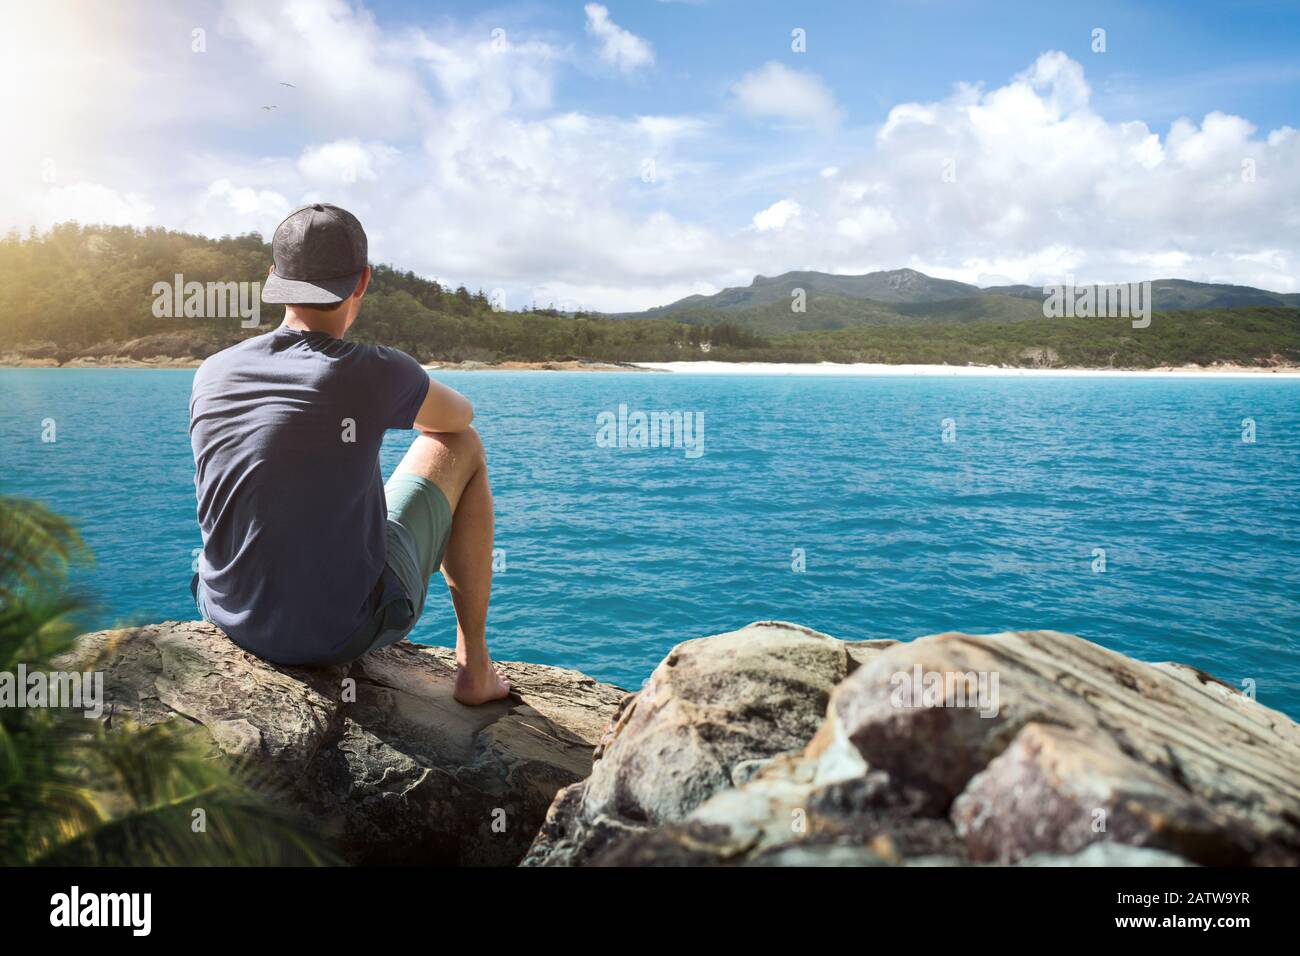 Young man sitting on a rock surrounded by tropical waters Stock Photo